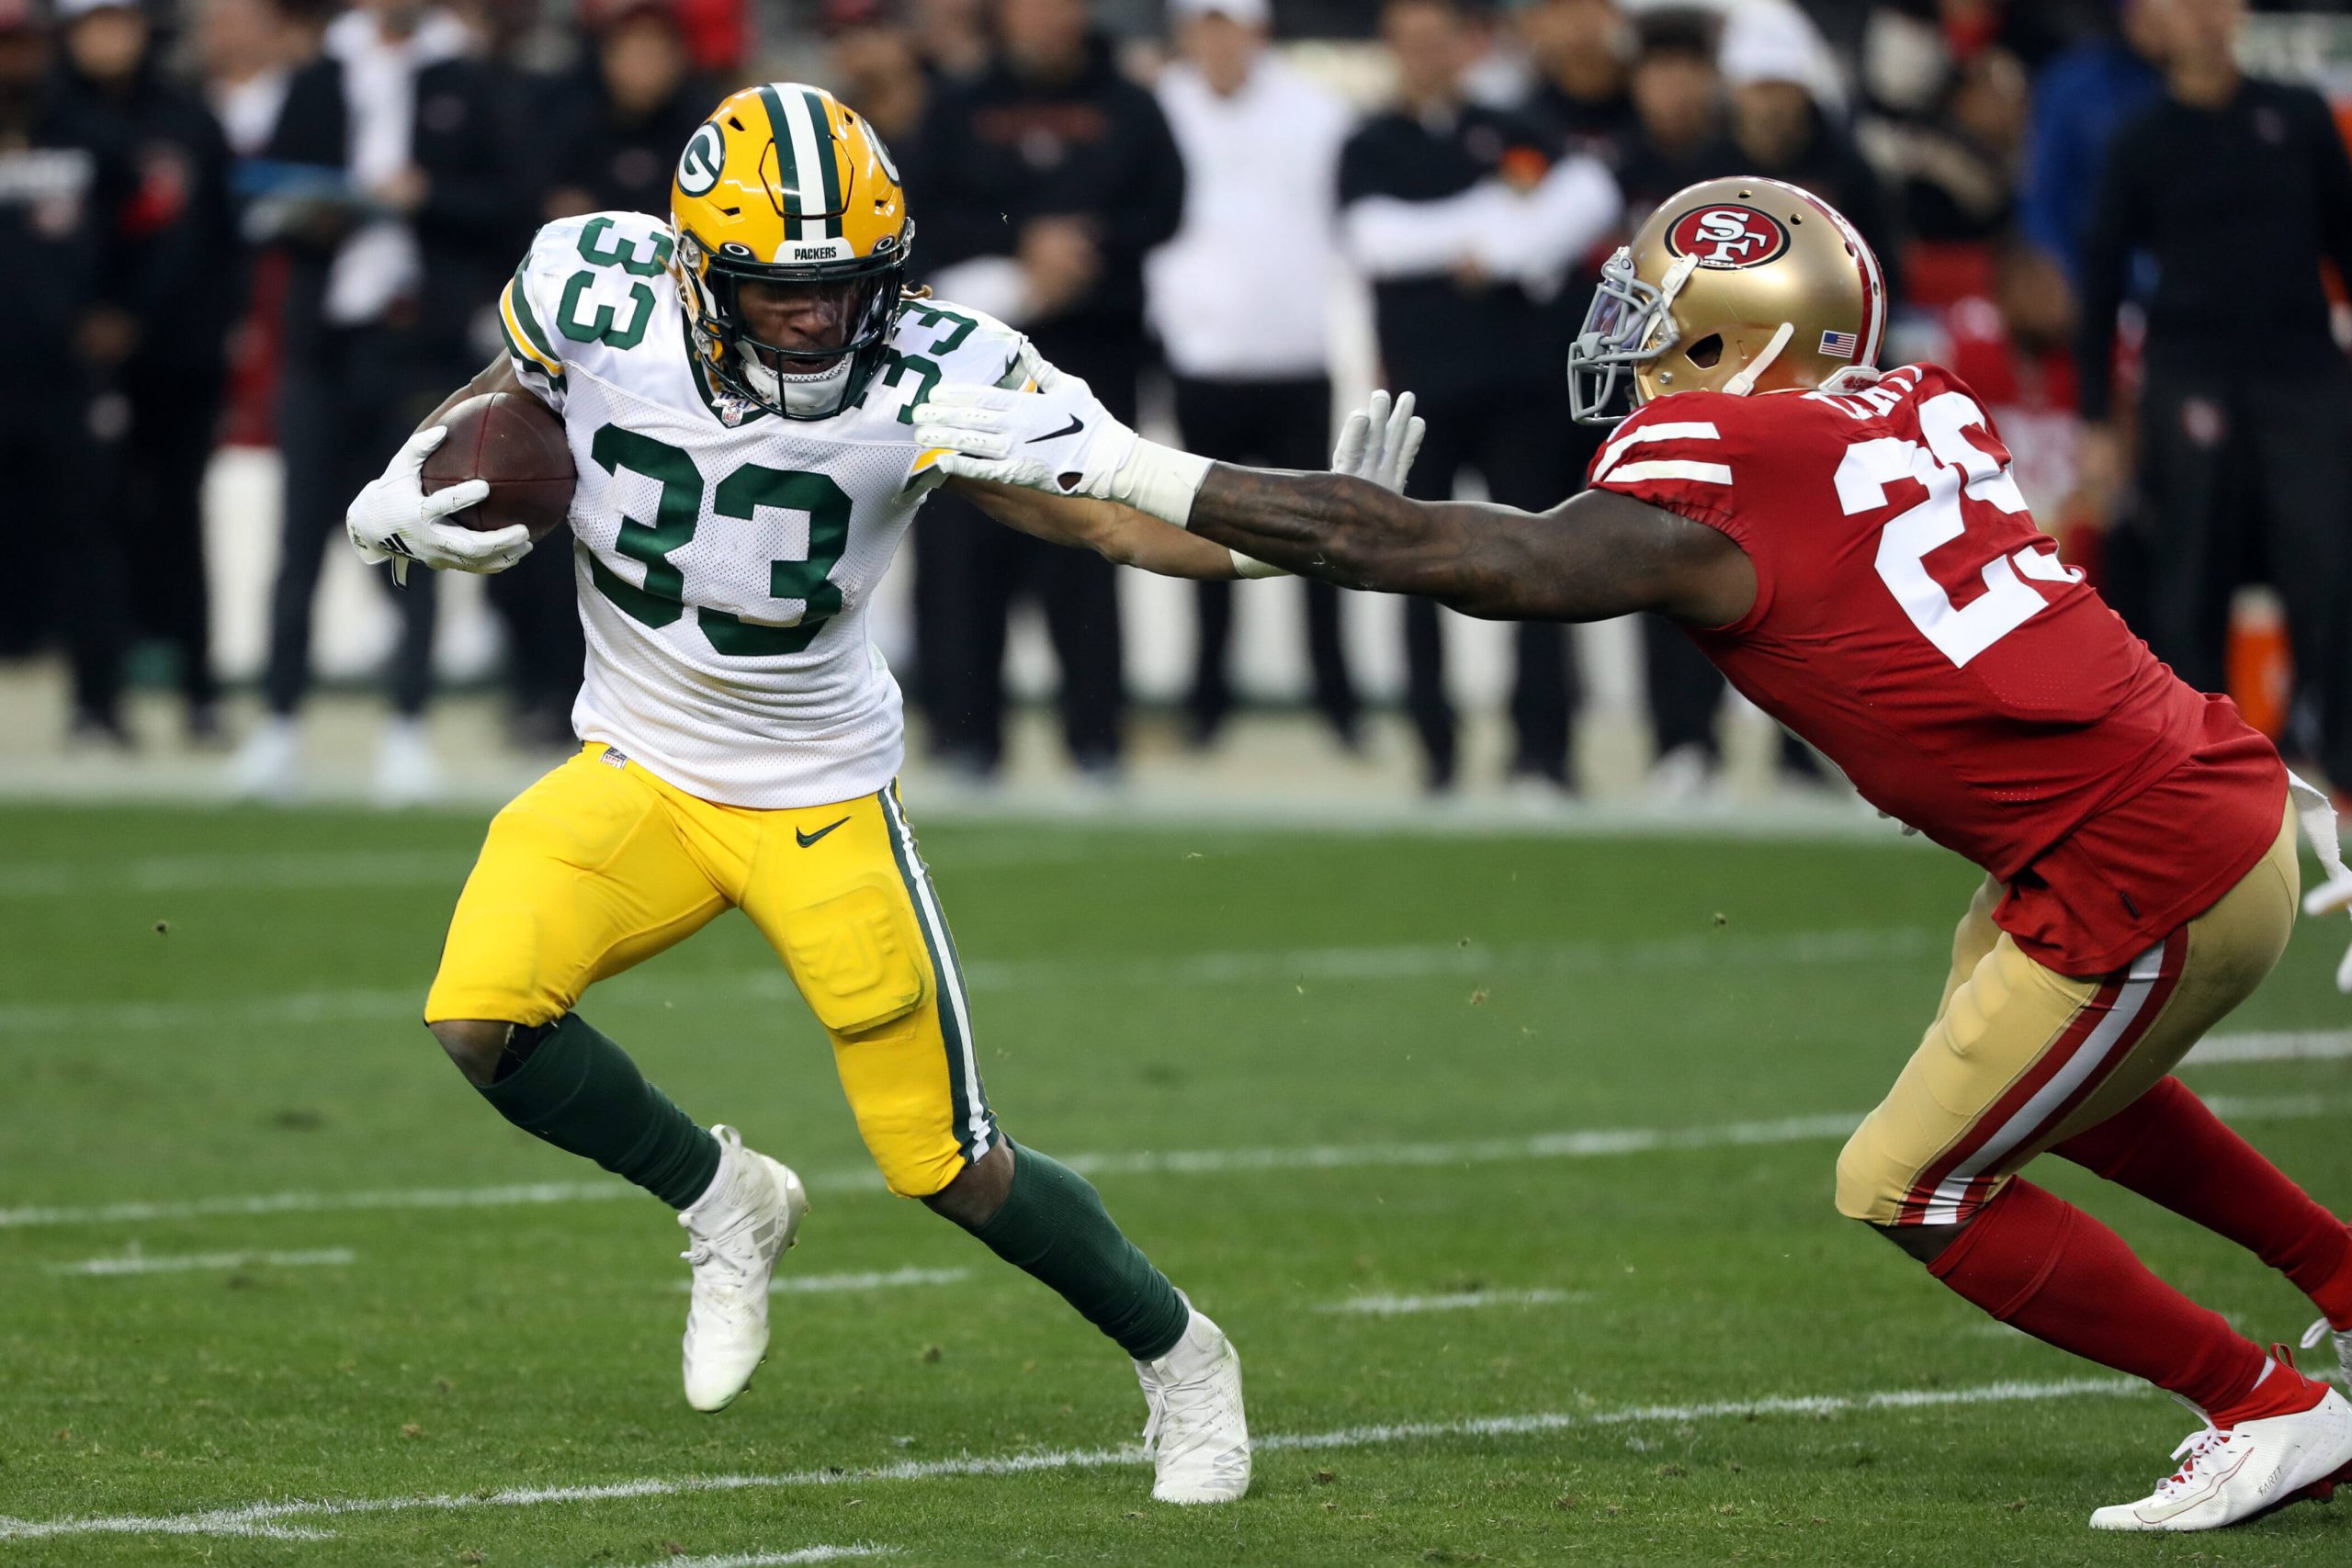 SANTA CLARA, CA - JANUARY 19: Green Bay Packers Running Back Aaron Jones rushes with the ball during an NFC Conference C